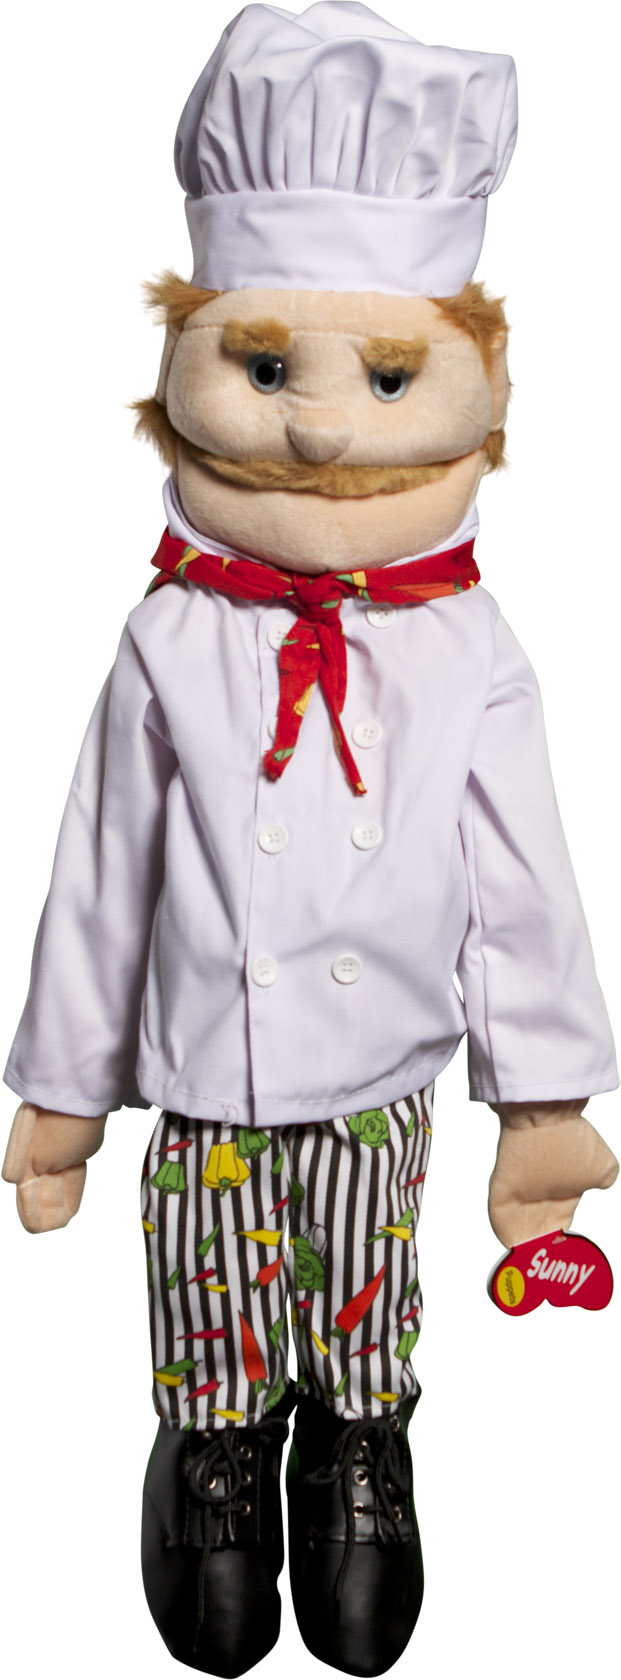 Sunny Toys GS4305 28 In. Dad Chef- Full Body Puppet